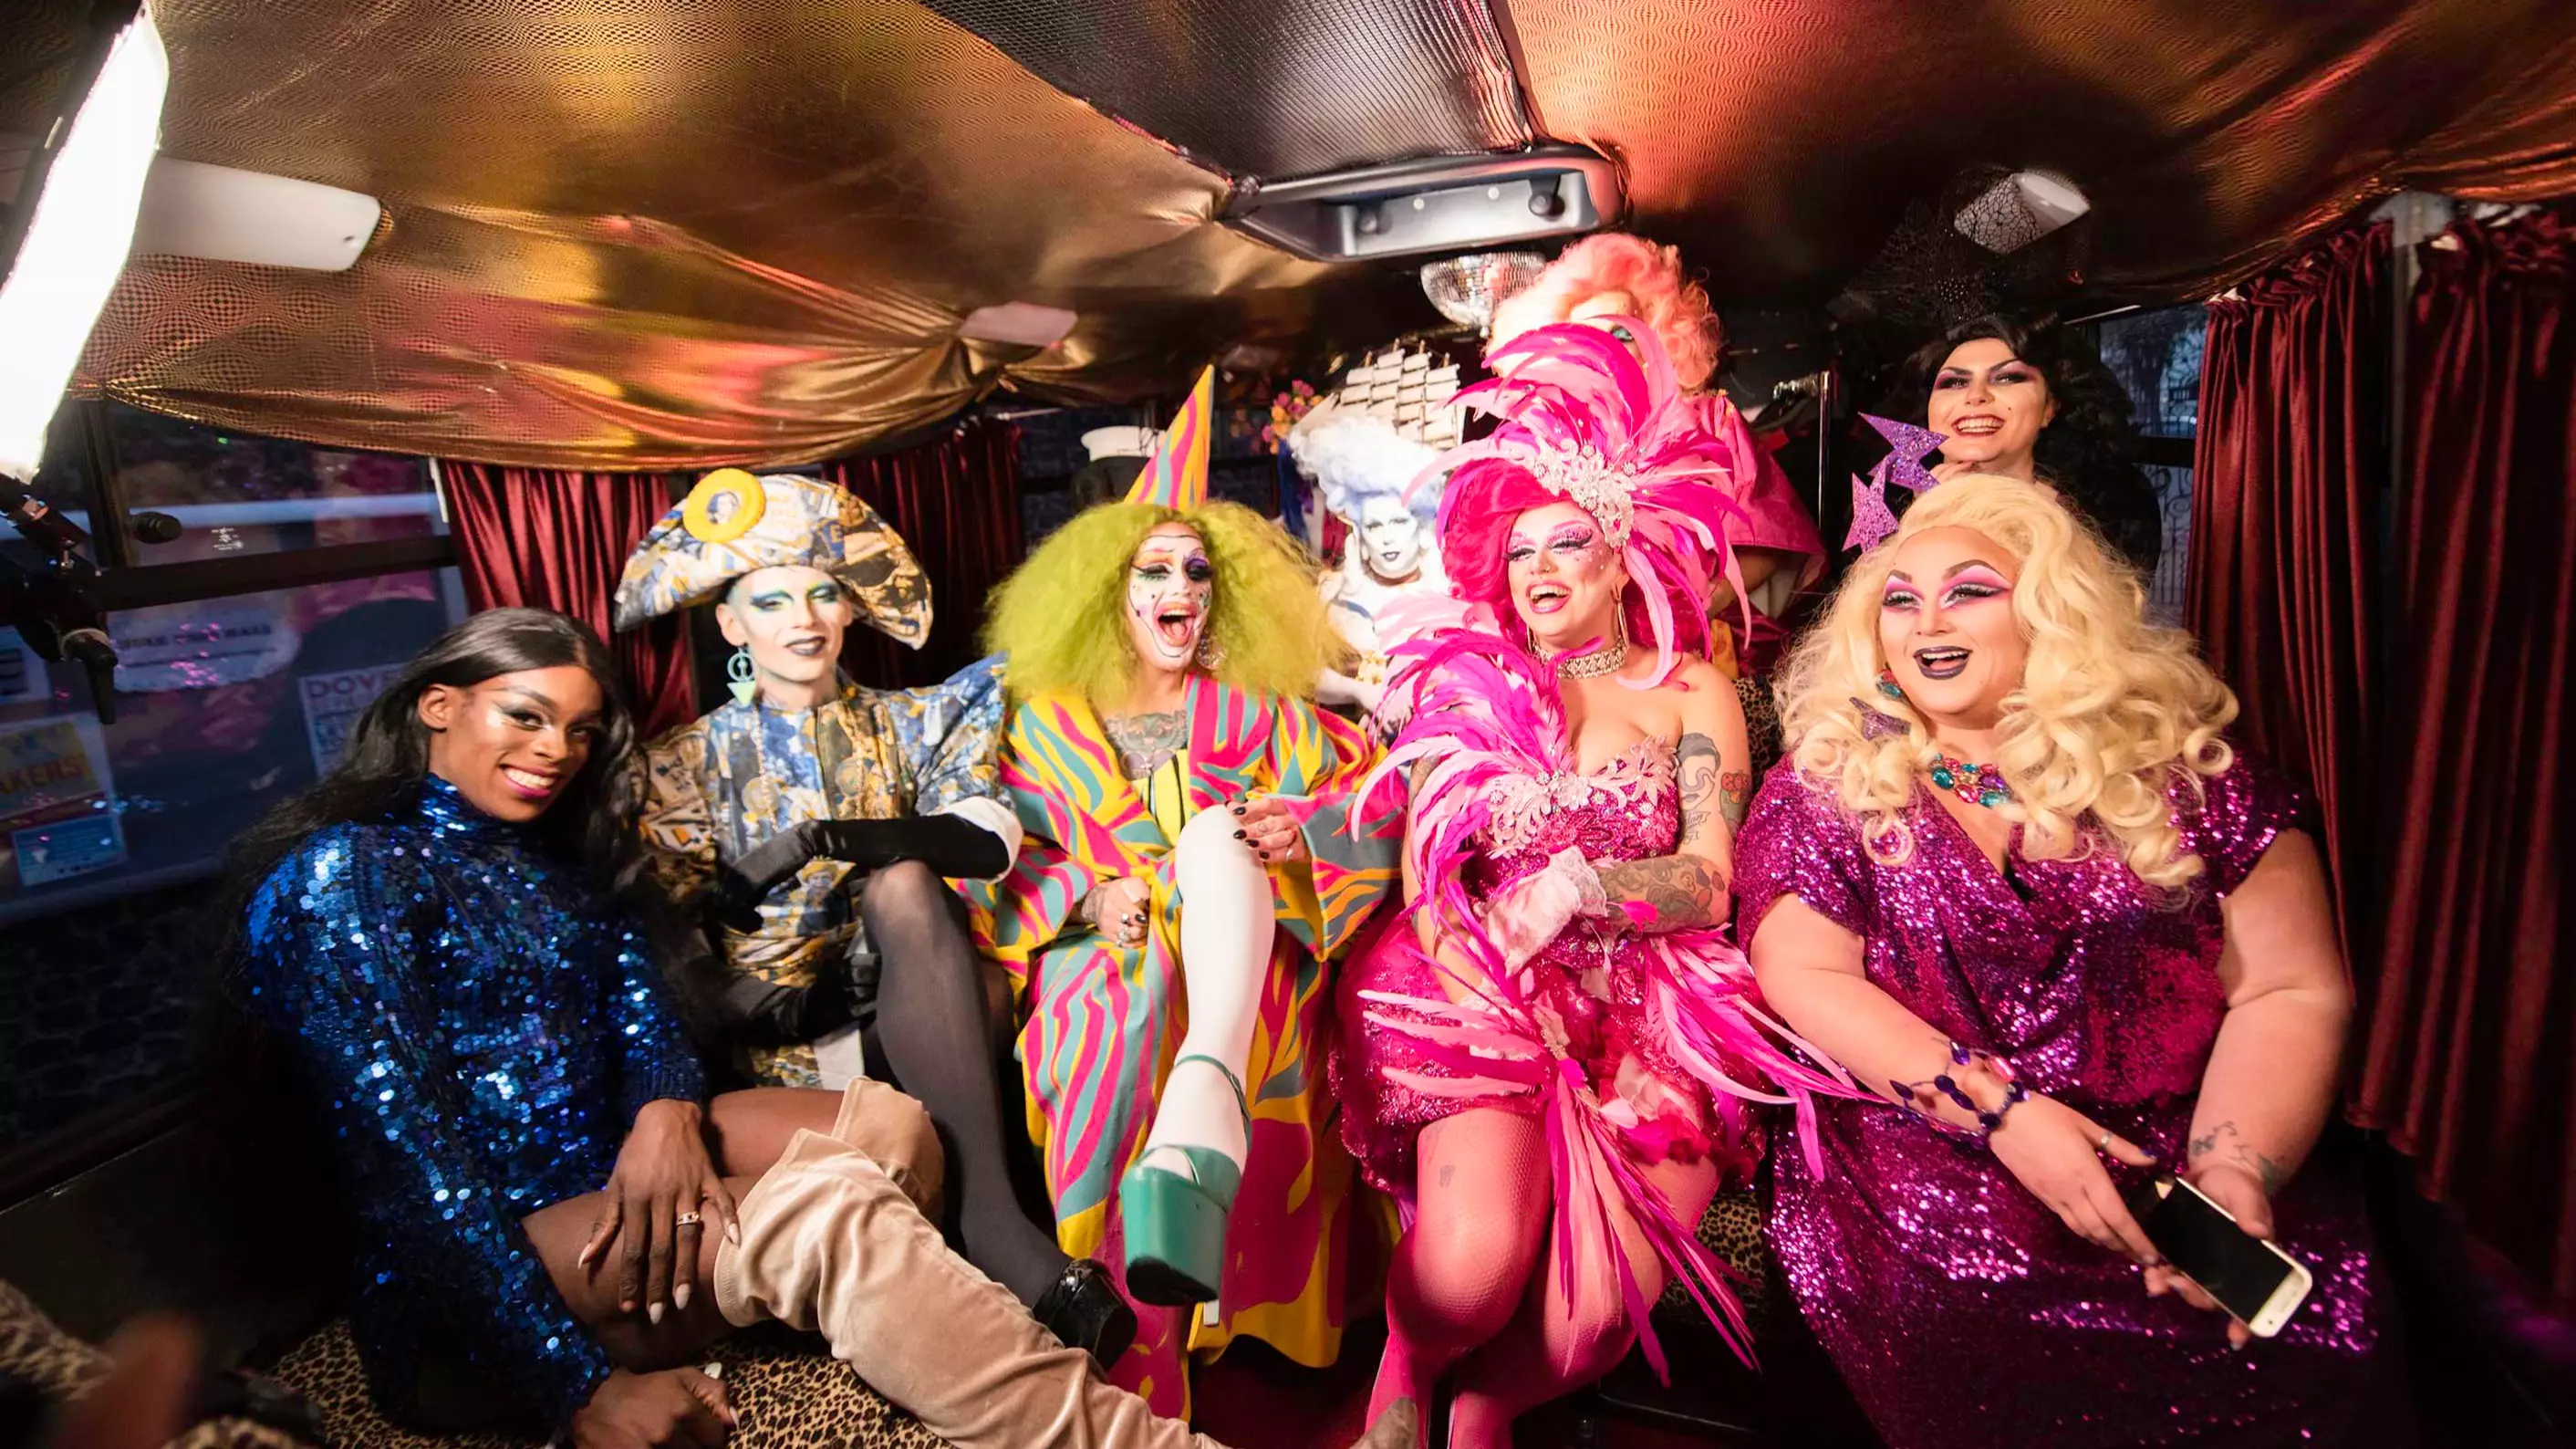 Channel 4’s New Drag Queen Makeover Show Is Being Called The New 'Queer Eye'